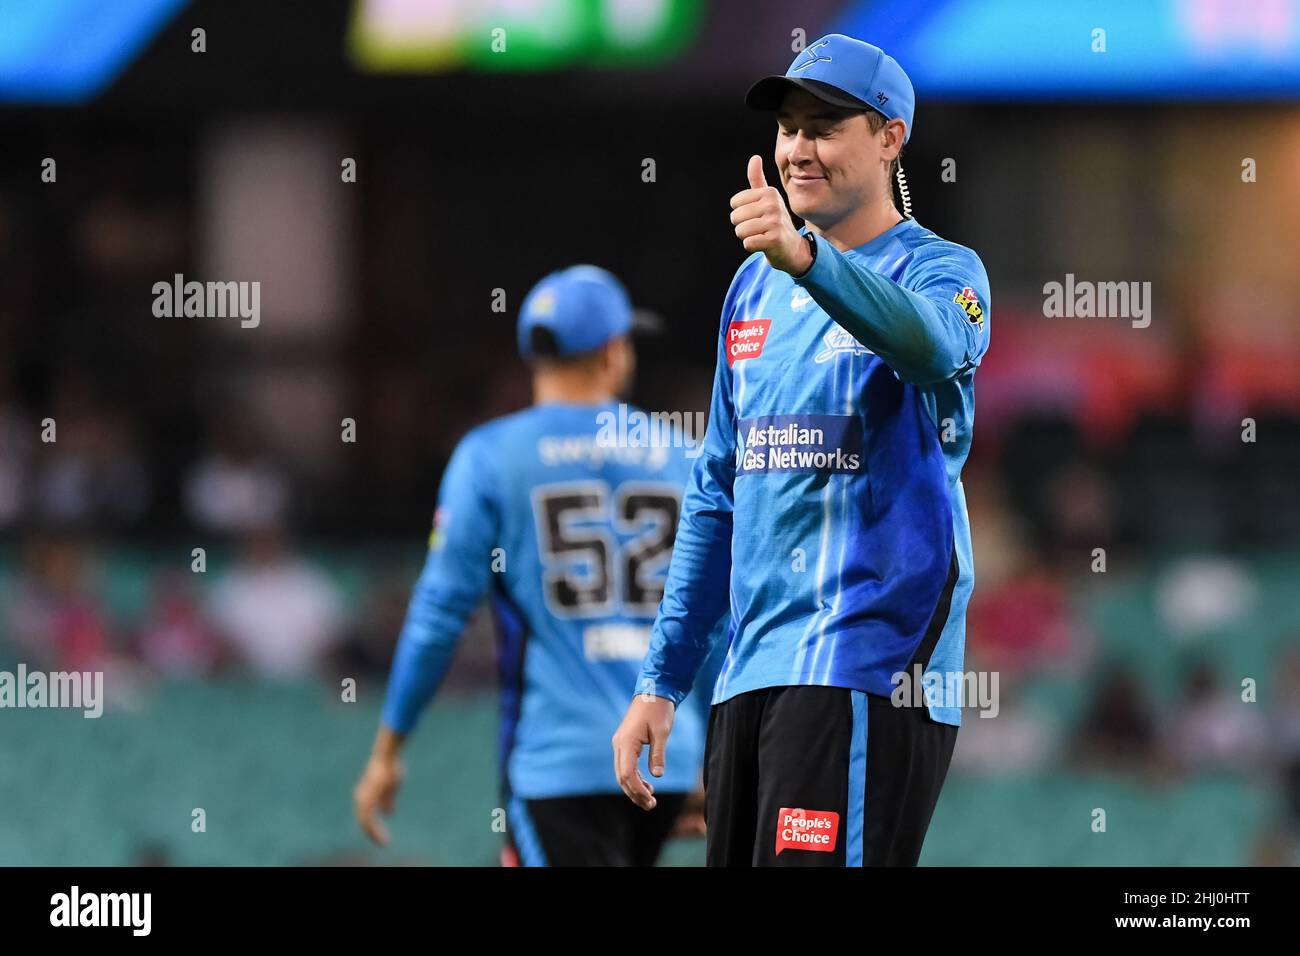 Sydney, Australia, 26 January, 2022. Matt Renshaw of the Strikers celebrates catching Dan Christian of the Sixers out during the Big Bash League Challenger cricket match between Sydney Sixers and Adelaide Strikers at The Sydney Cricket Ground on January 26, 2022 in Sydney, Australia. Credit: Steven Markham/Speed Media/Alamy Live News Stock Photo